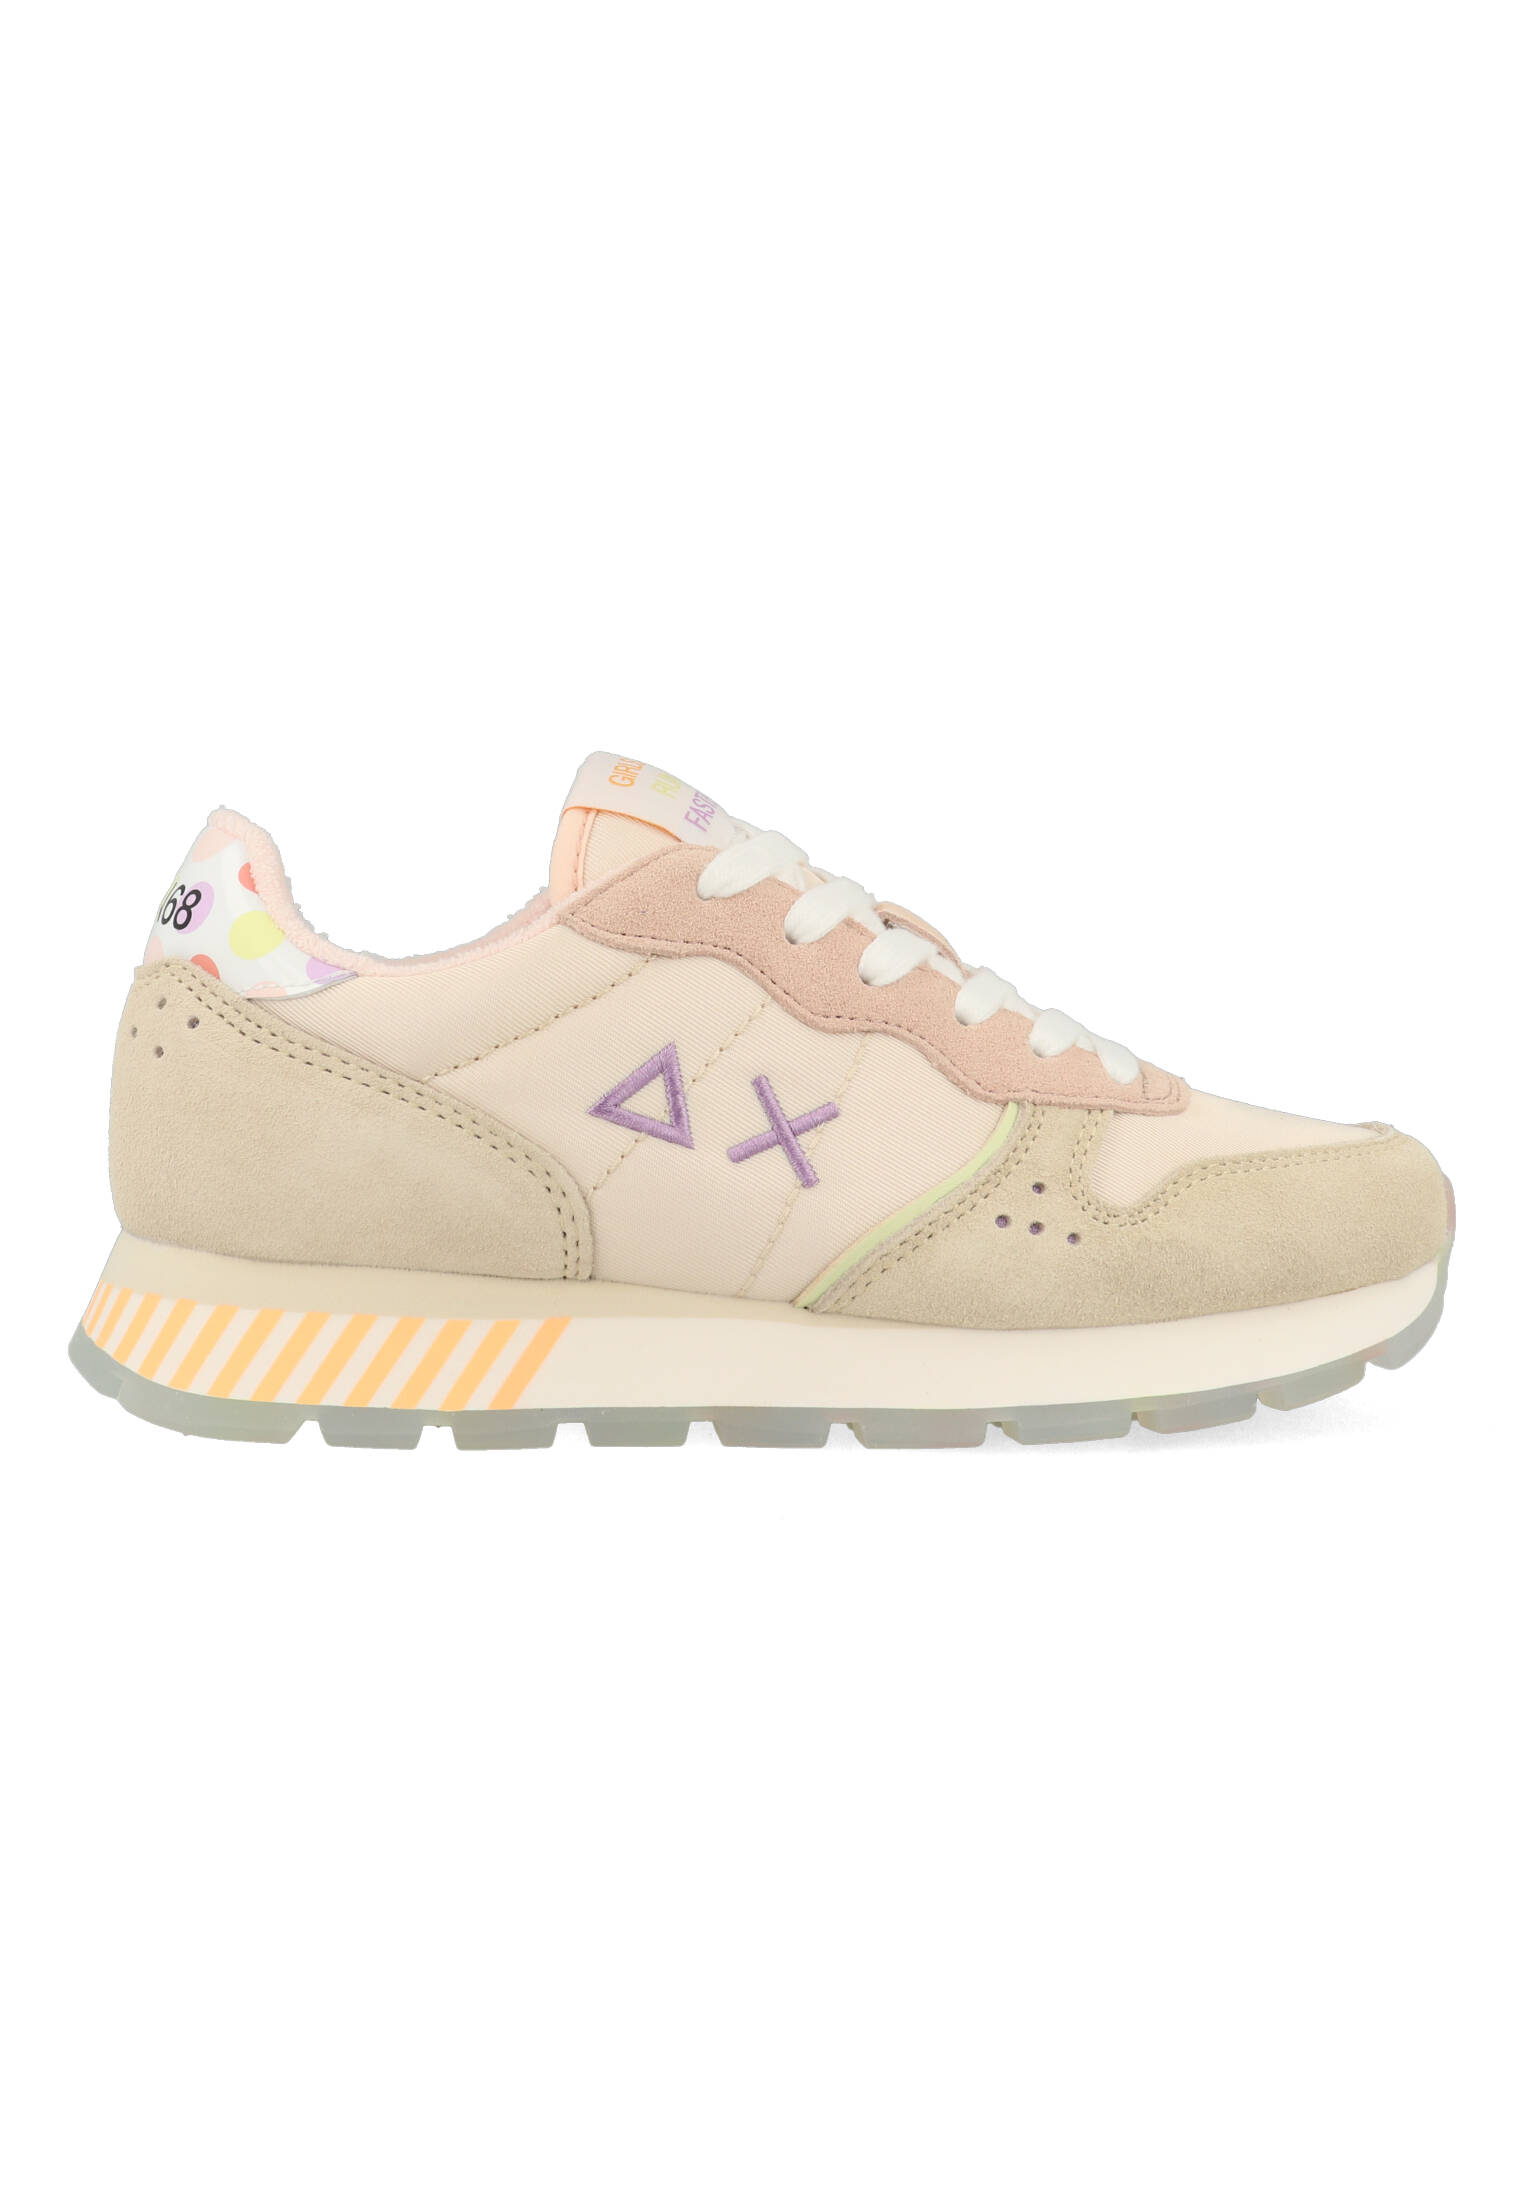 Sun68 Ally Candy Cane Z34205_31 Beige-38 maat 38